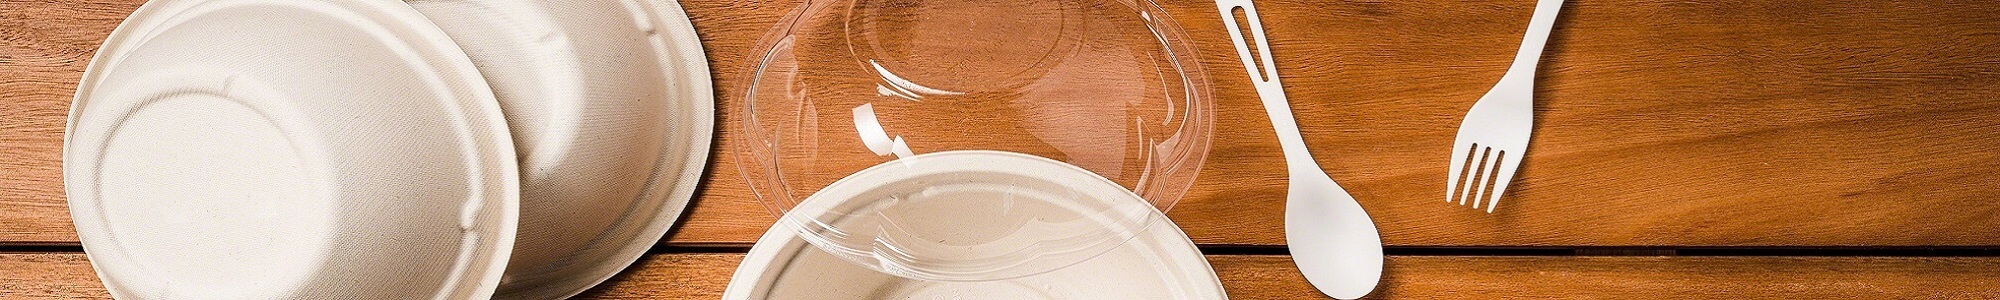 Compostable fiber containers and cutlery